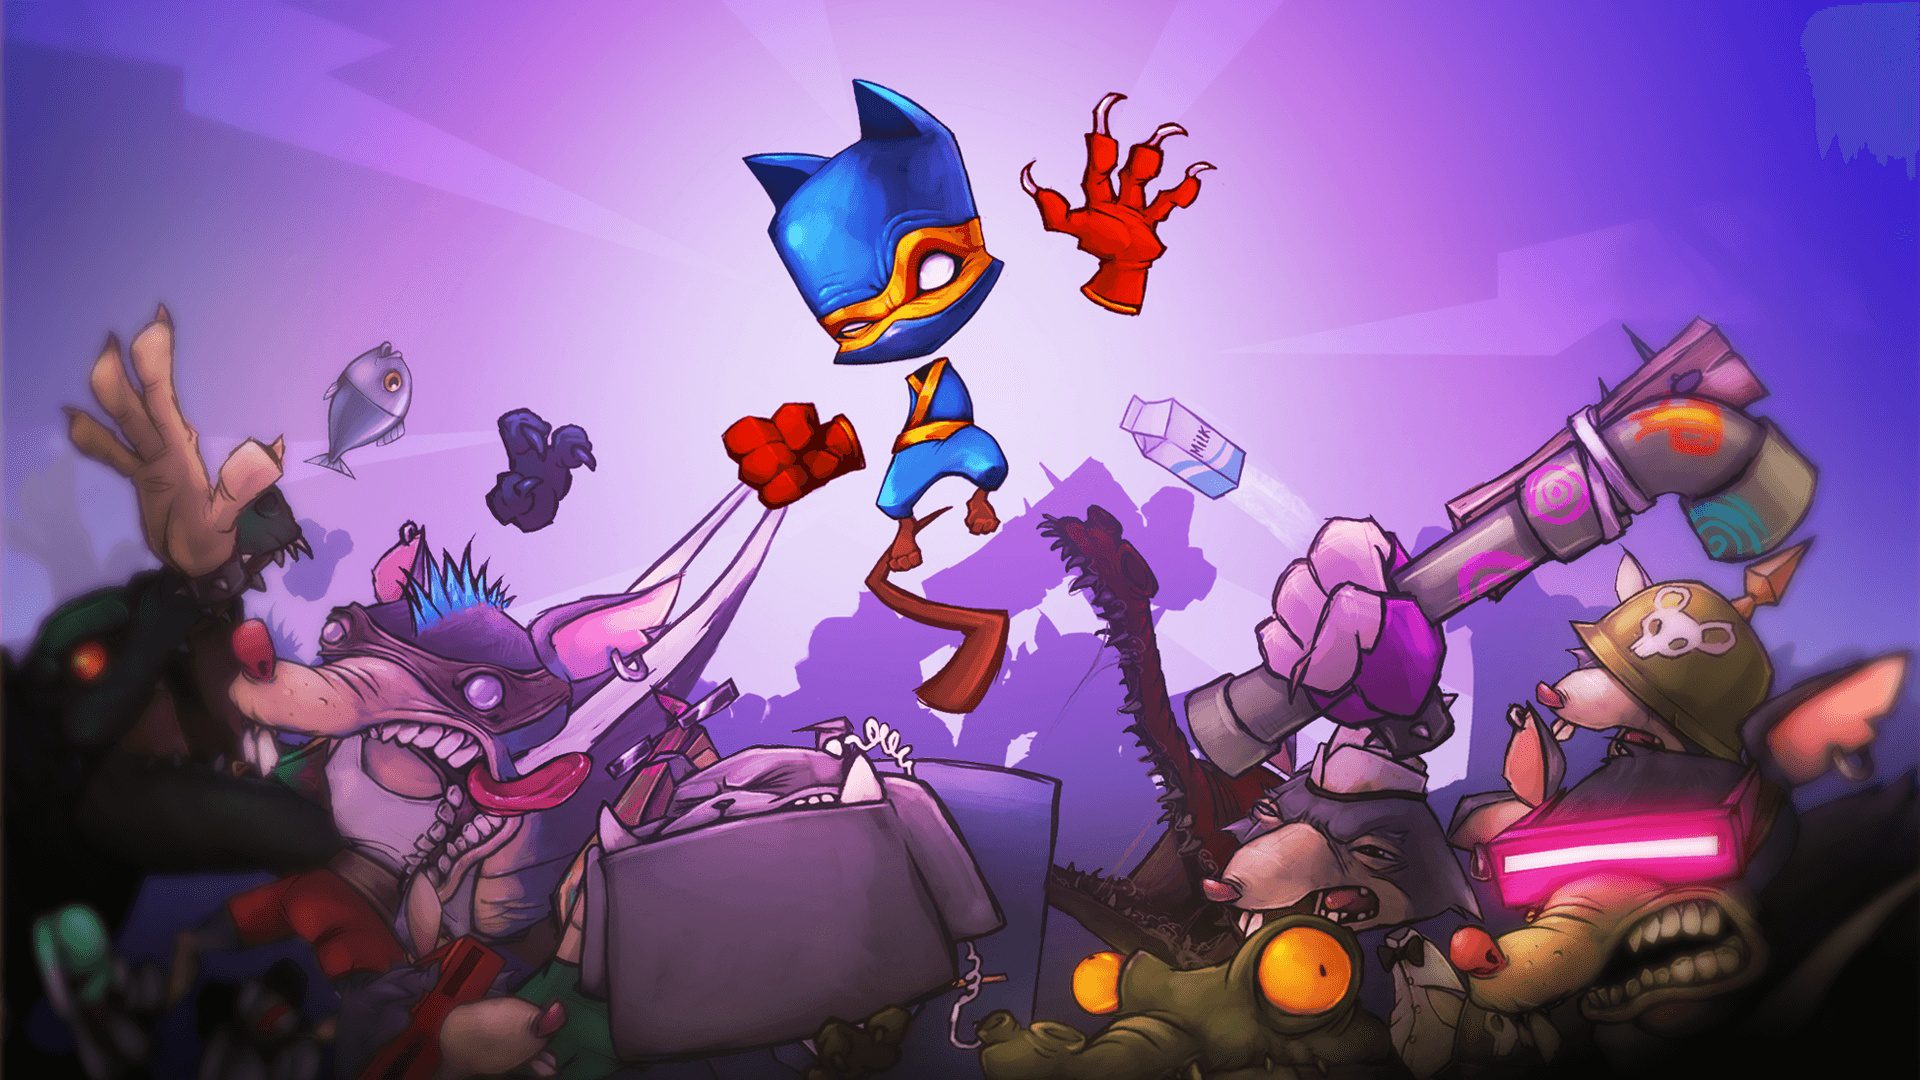 Co-op Beat’em up ‘Claws of Furry’ is racing onto PC and consoles